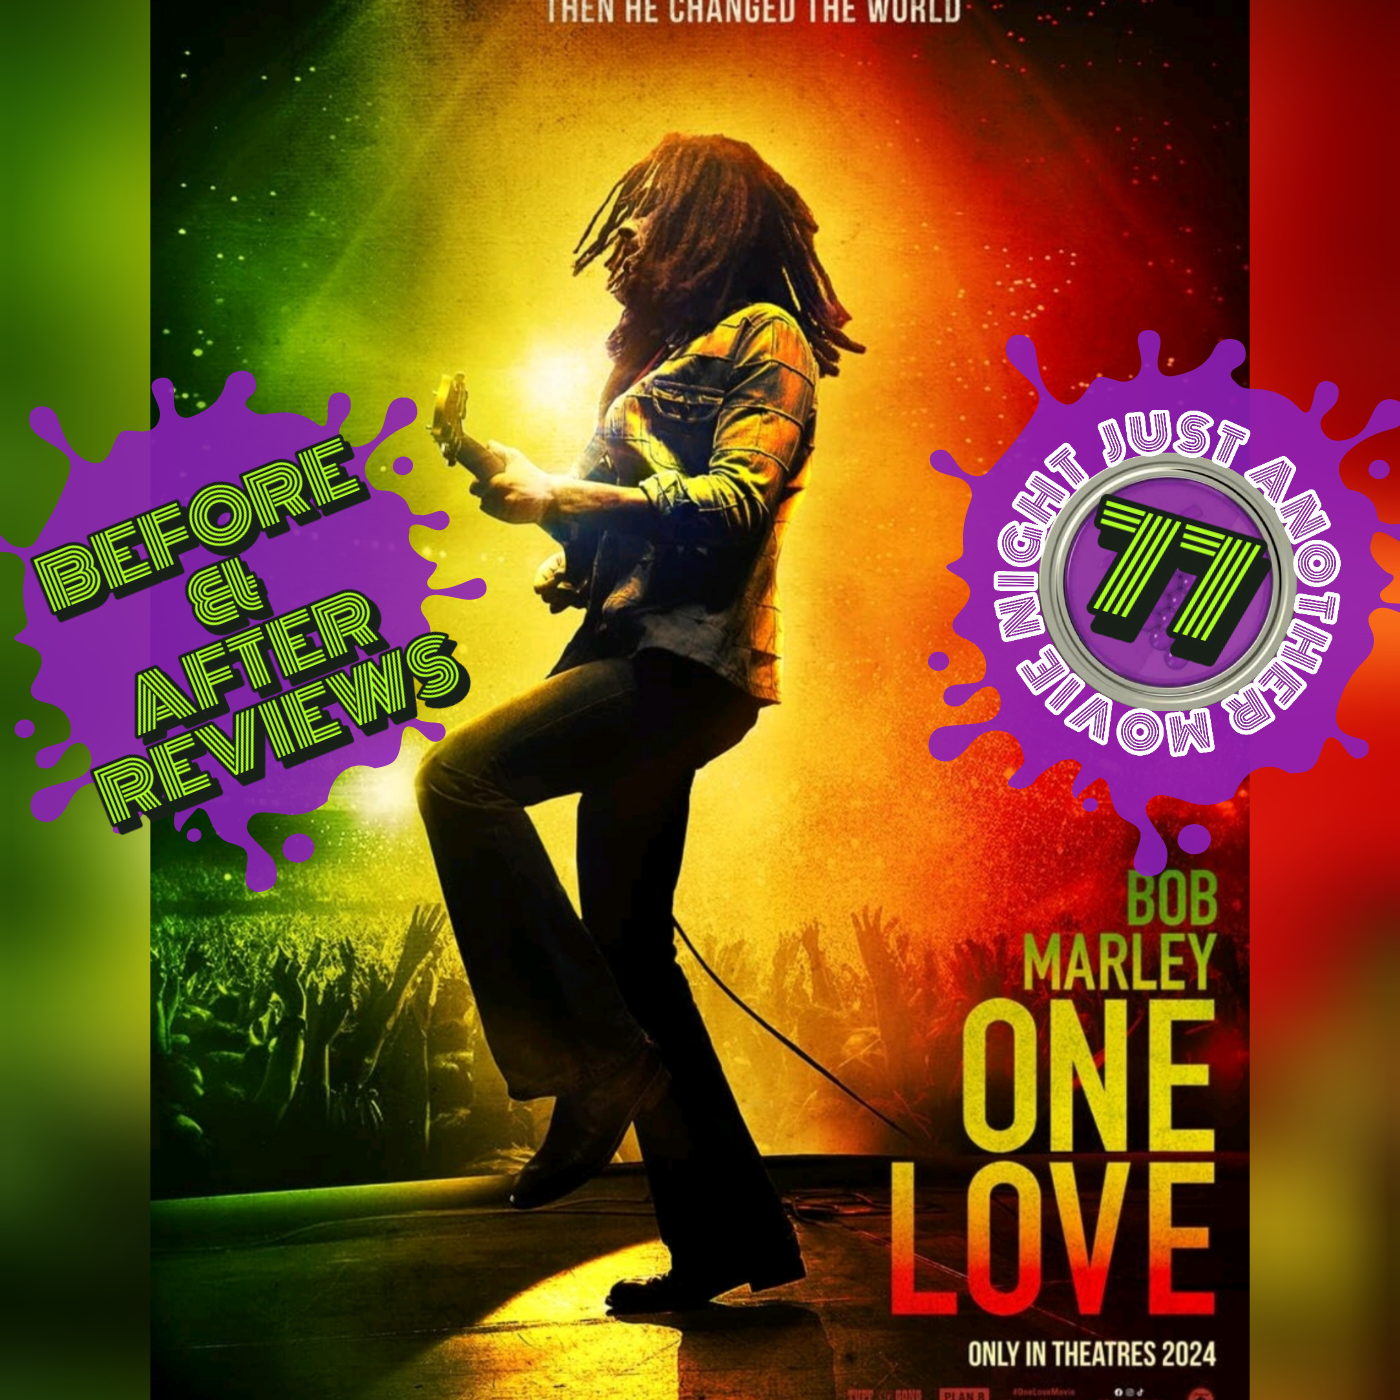 Before and After reviews episode 77: Bob Marley One Love